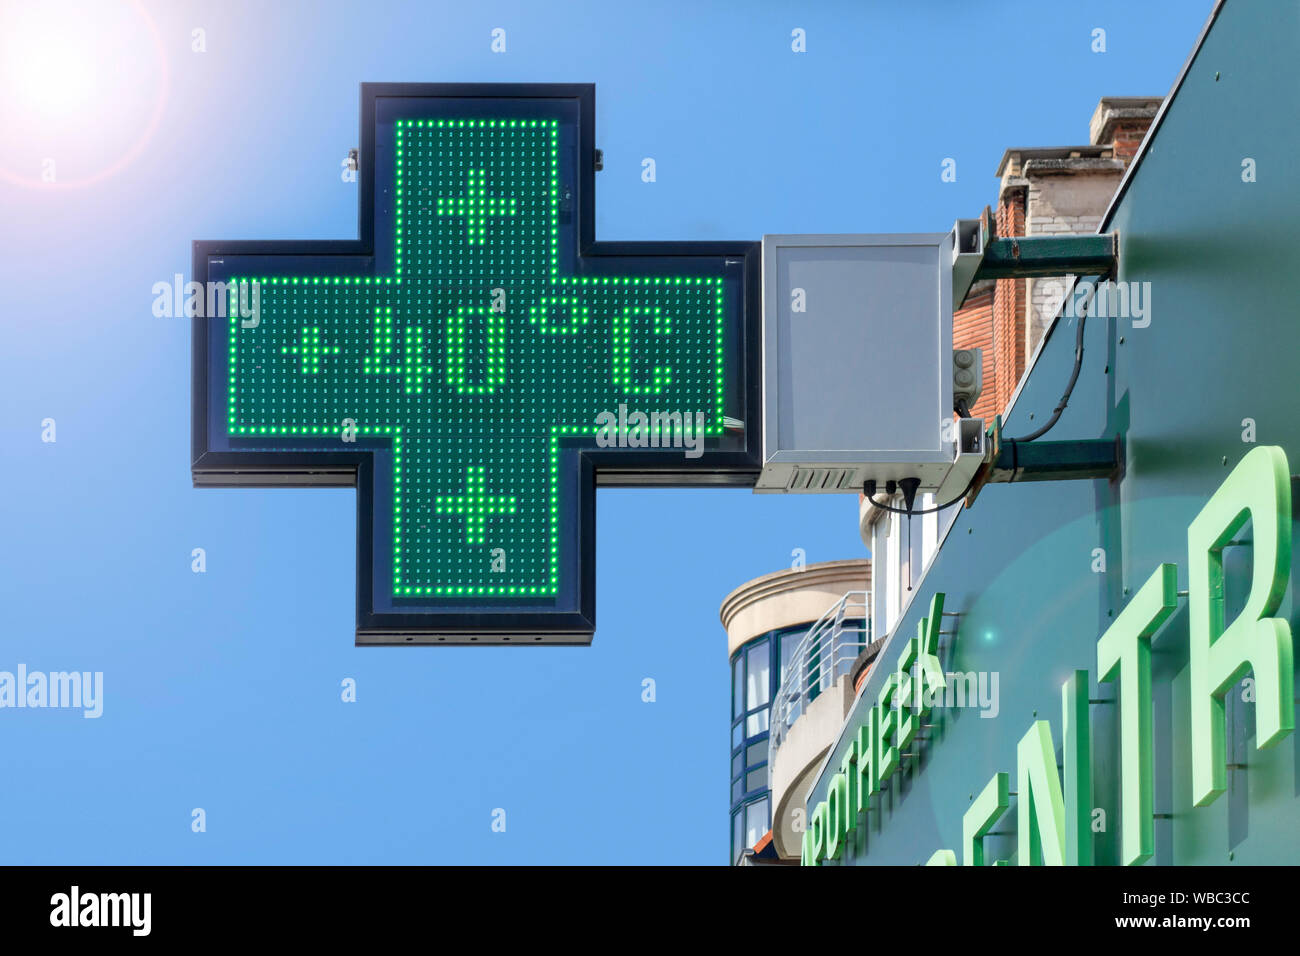 Thermometer in green pharmacy screen sign displays extremely hot temperature of 40 degrees Celsius / 40°C / 40 °C during summer heatwave / heat wave Stock Photo